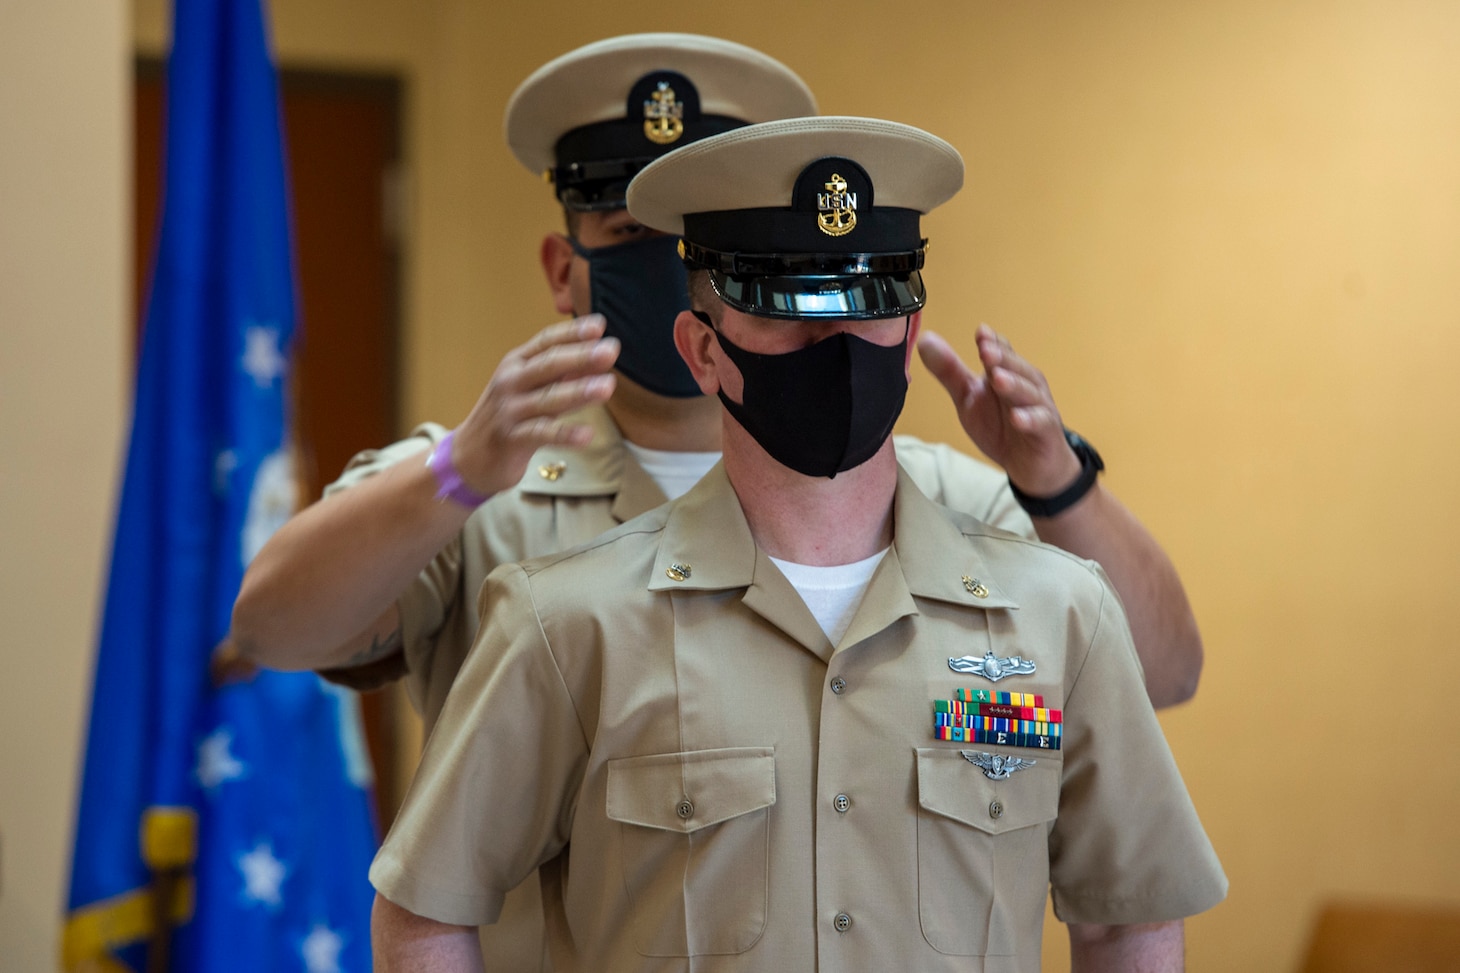 Chief Aviation Aerographer’s Mate Travis Strait of U.S. Fleet Forces Command (USFFC) receives his cover during a chief petty officer (CPO) pinning ceremony at the USFFC headquarters in Norfolk, Virginia.